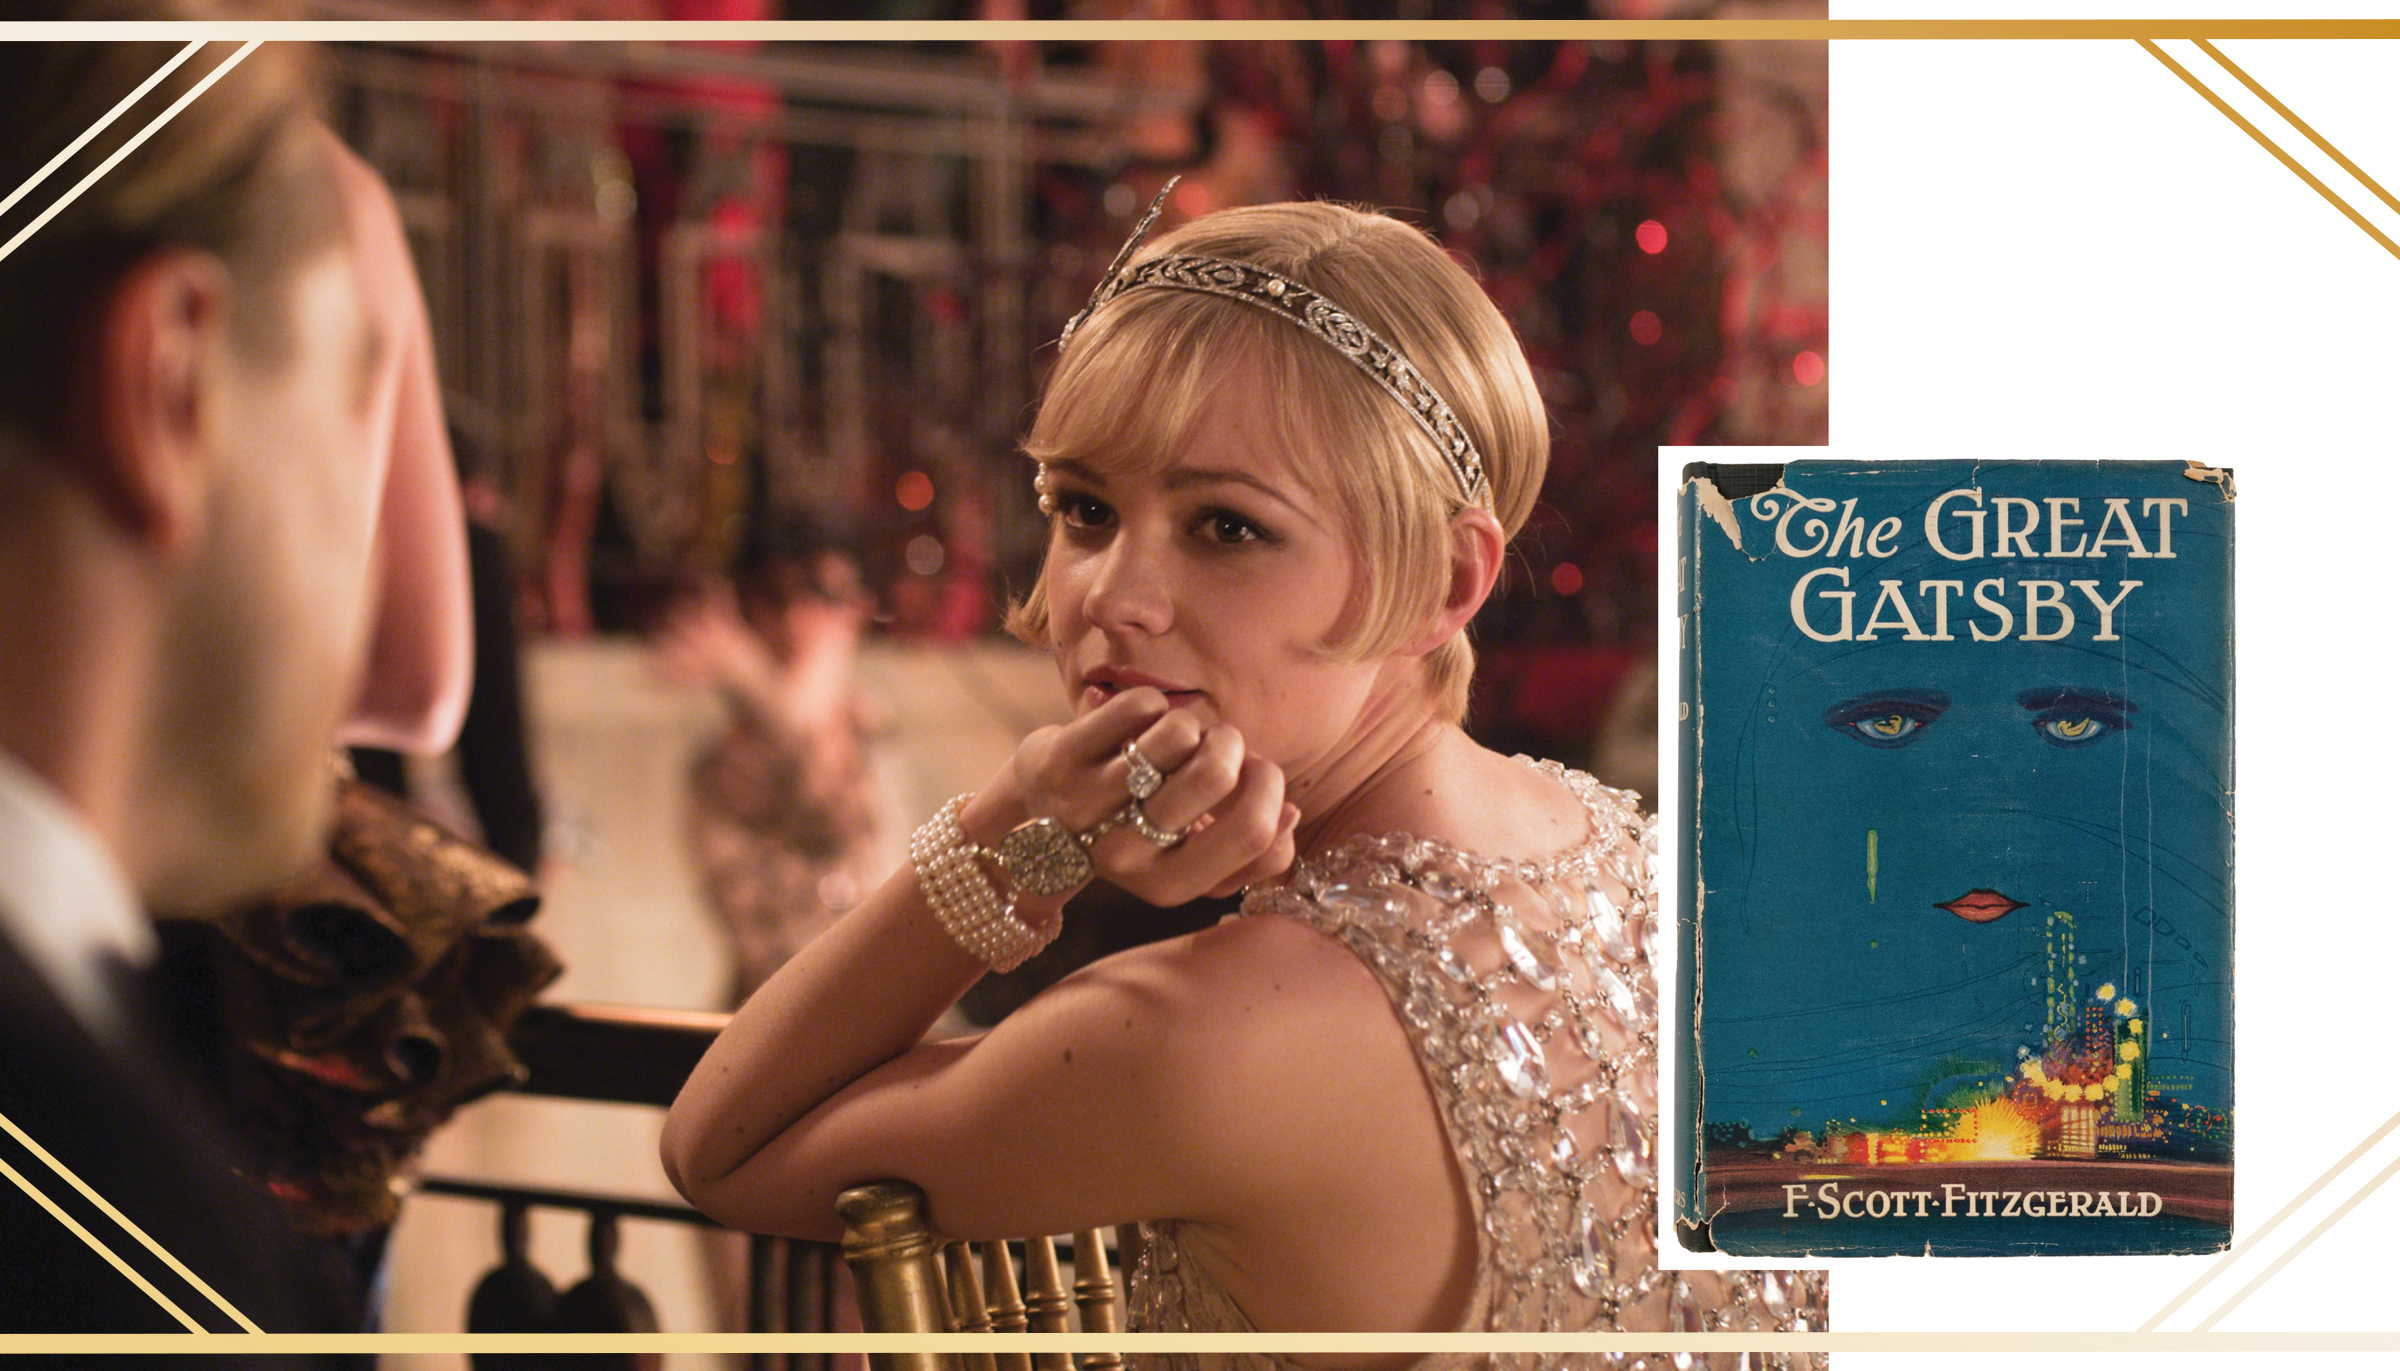 Left: Carey Mulligan as Daisy Buchanan in Baz Luhrmann’s The Great Gatsby (2013) adorned with Art Deco Diamond Jewellery by Tiffany & Co. 

Right: Cover of F. Scott Fitzgerald's 1925 novel 'The Great Gatsby 